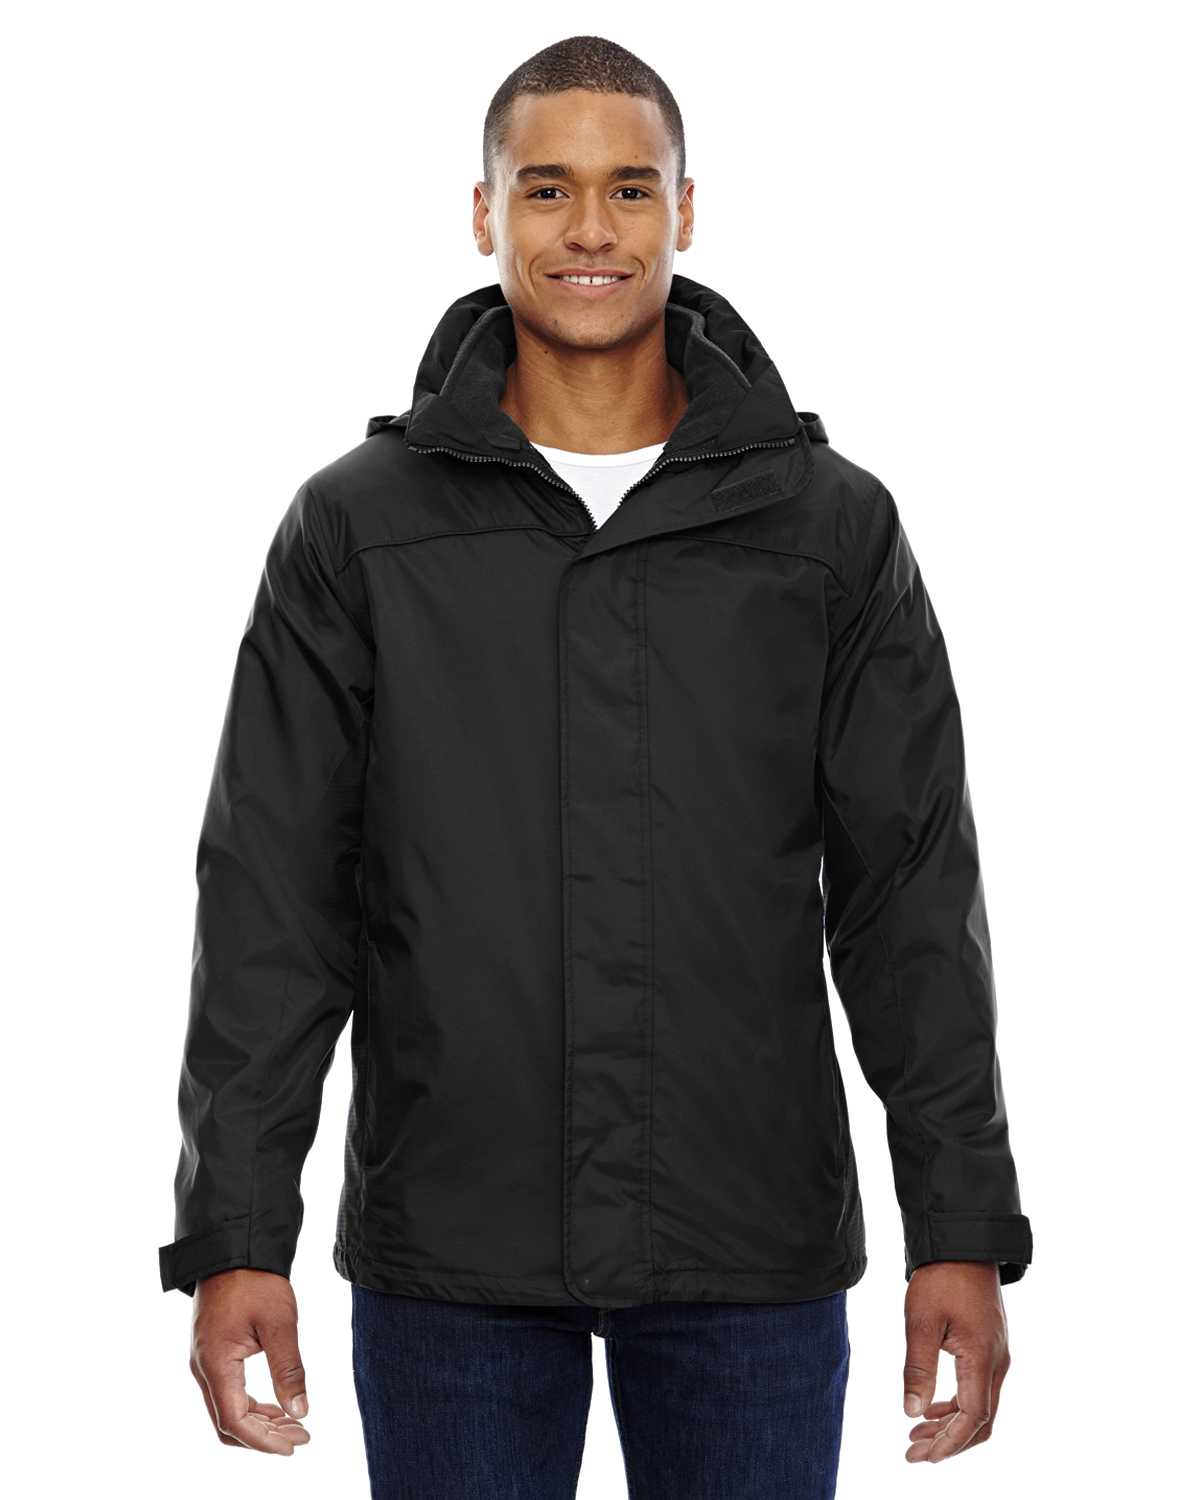 North End 88130 Adult 3-in-1 Jacket | ApparelChoice.com